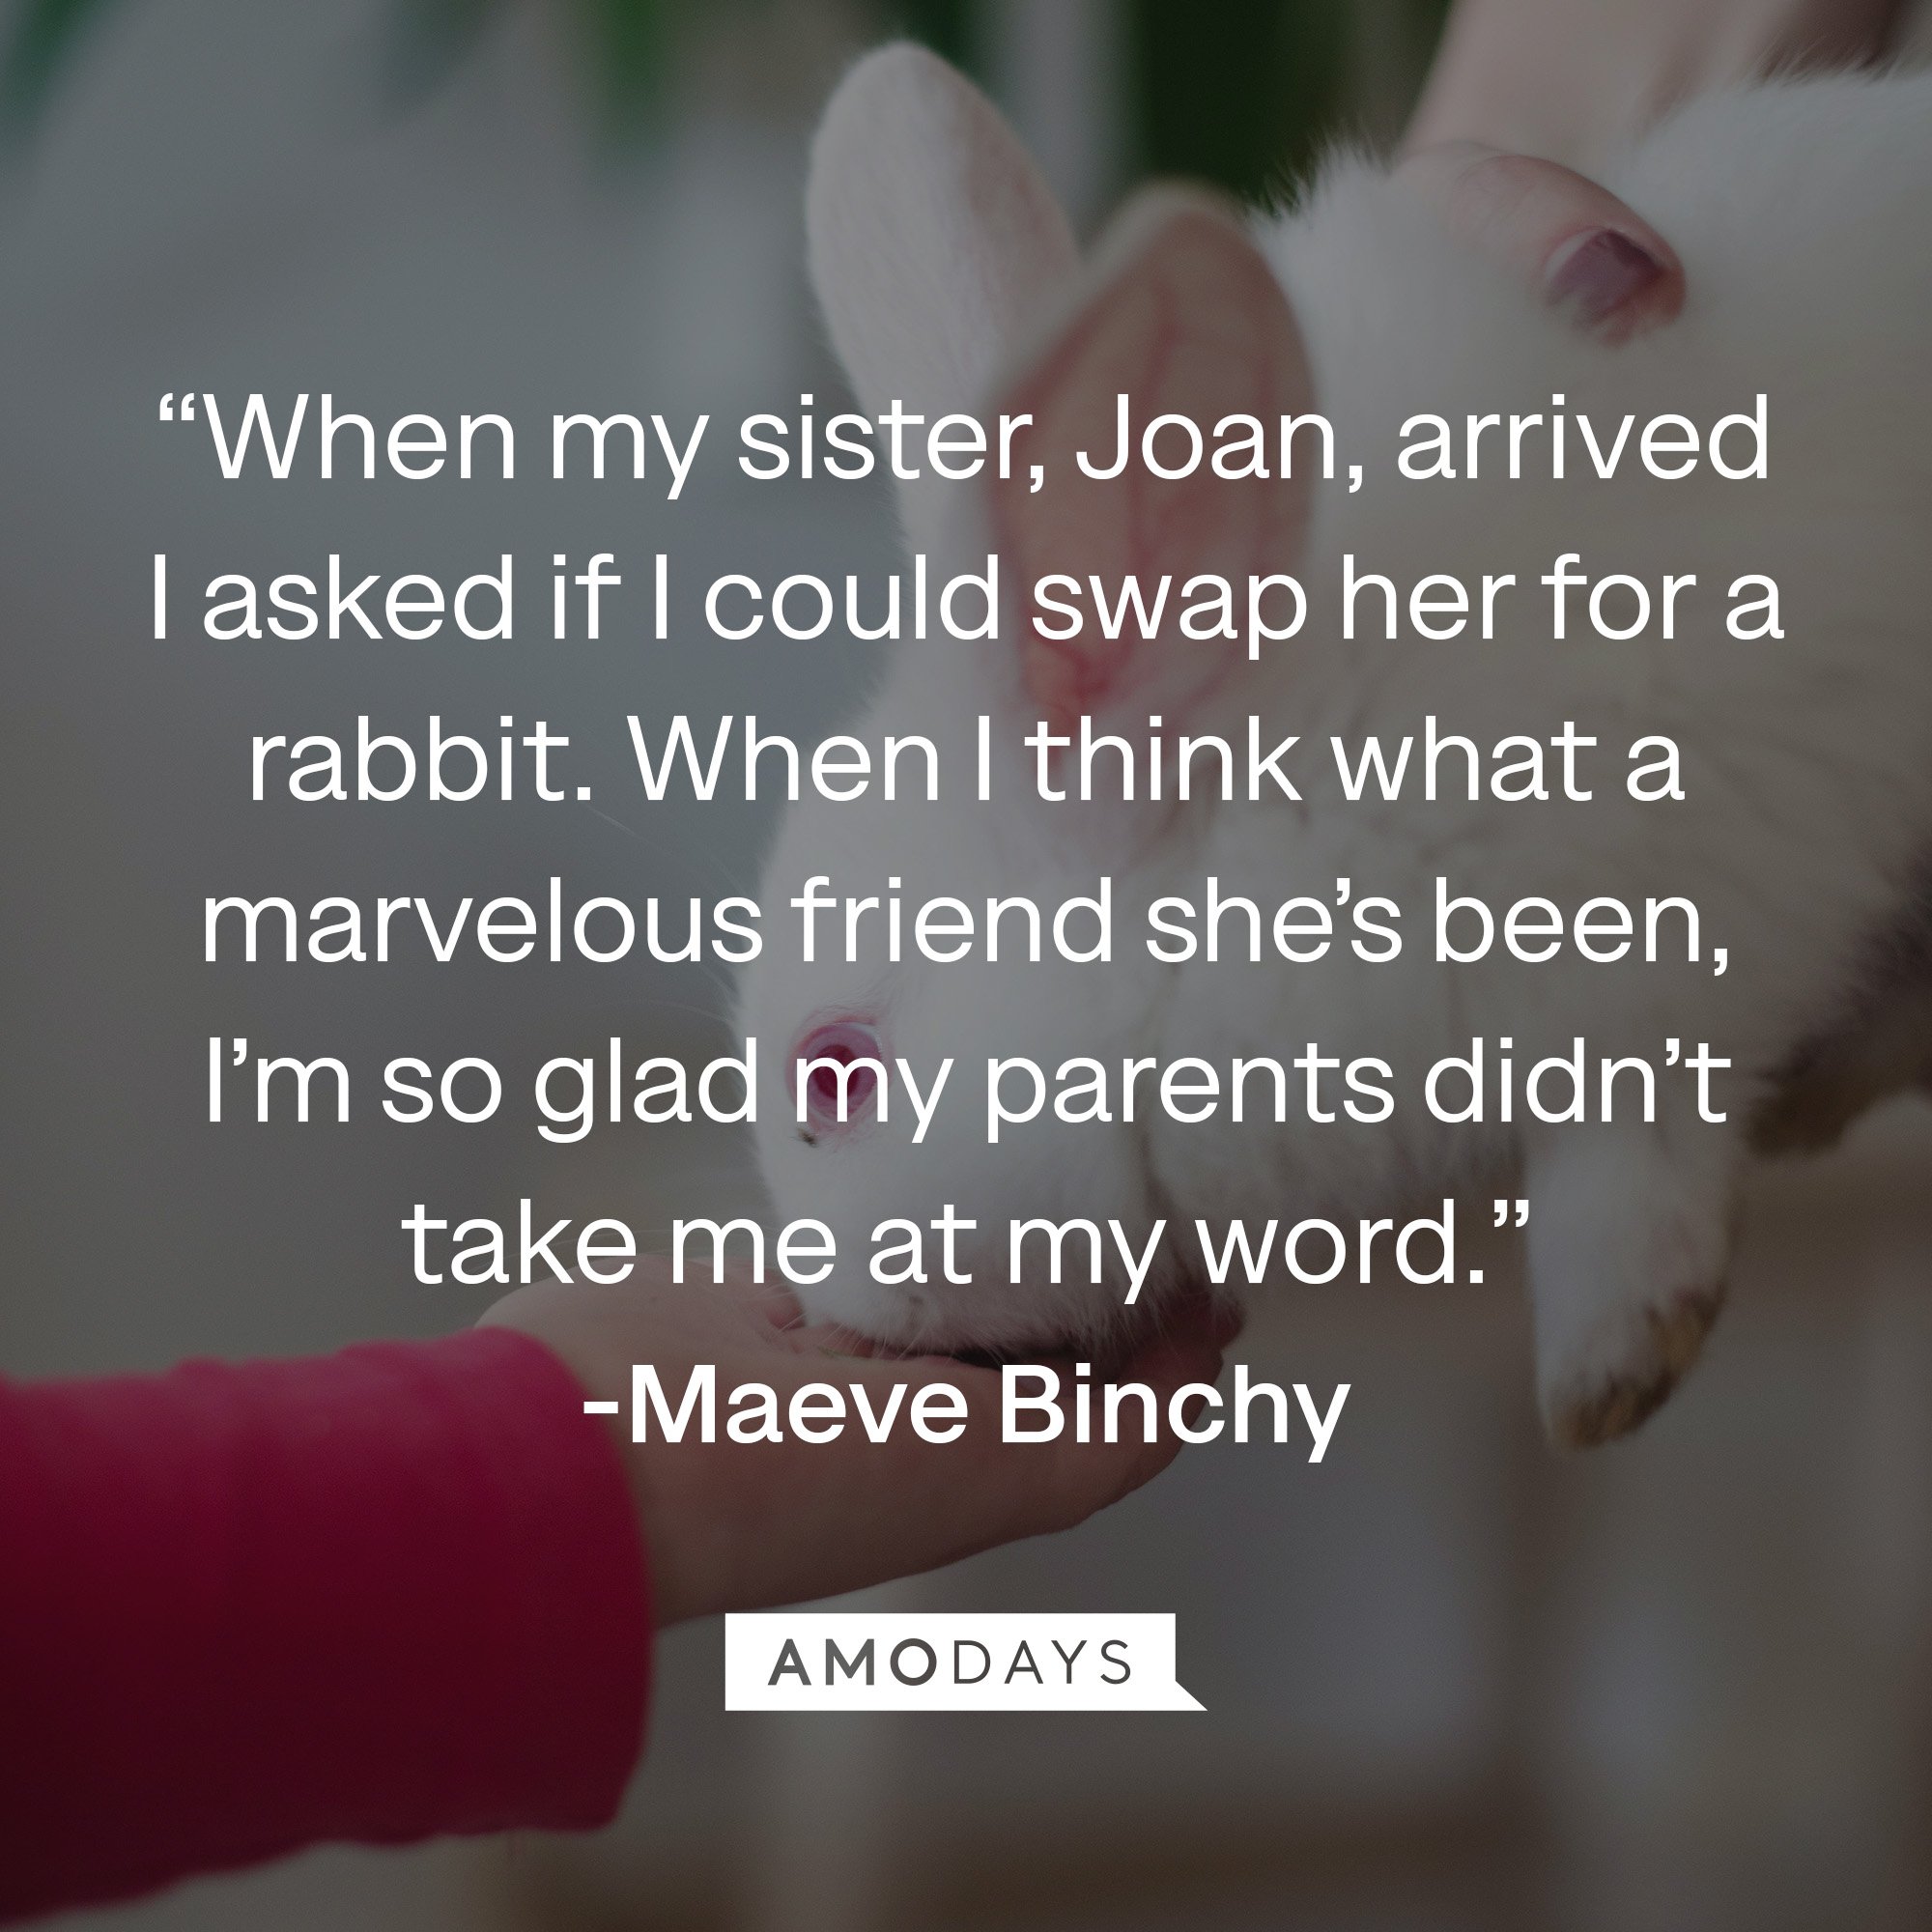 Maeve Binchy's quote: “When my sister, Joan, arrived I asked if I could swap her for a rabbit. When I think what a marvelous friend she’s been, I’m so glad my parents didn’t take me at my word.” | Image: AmoDays